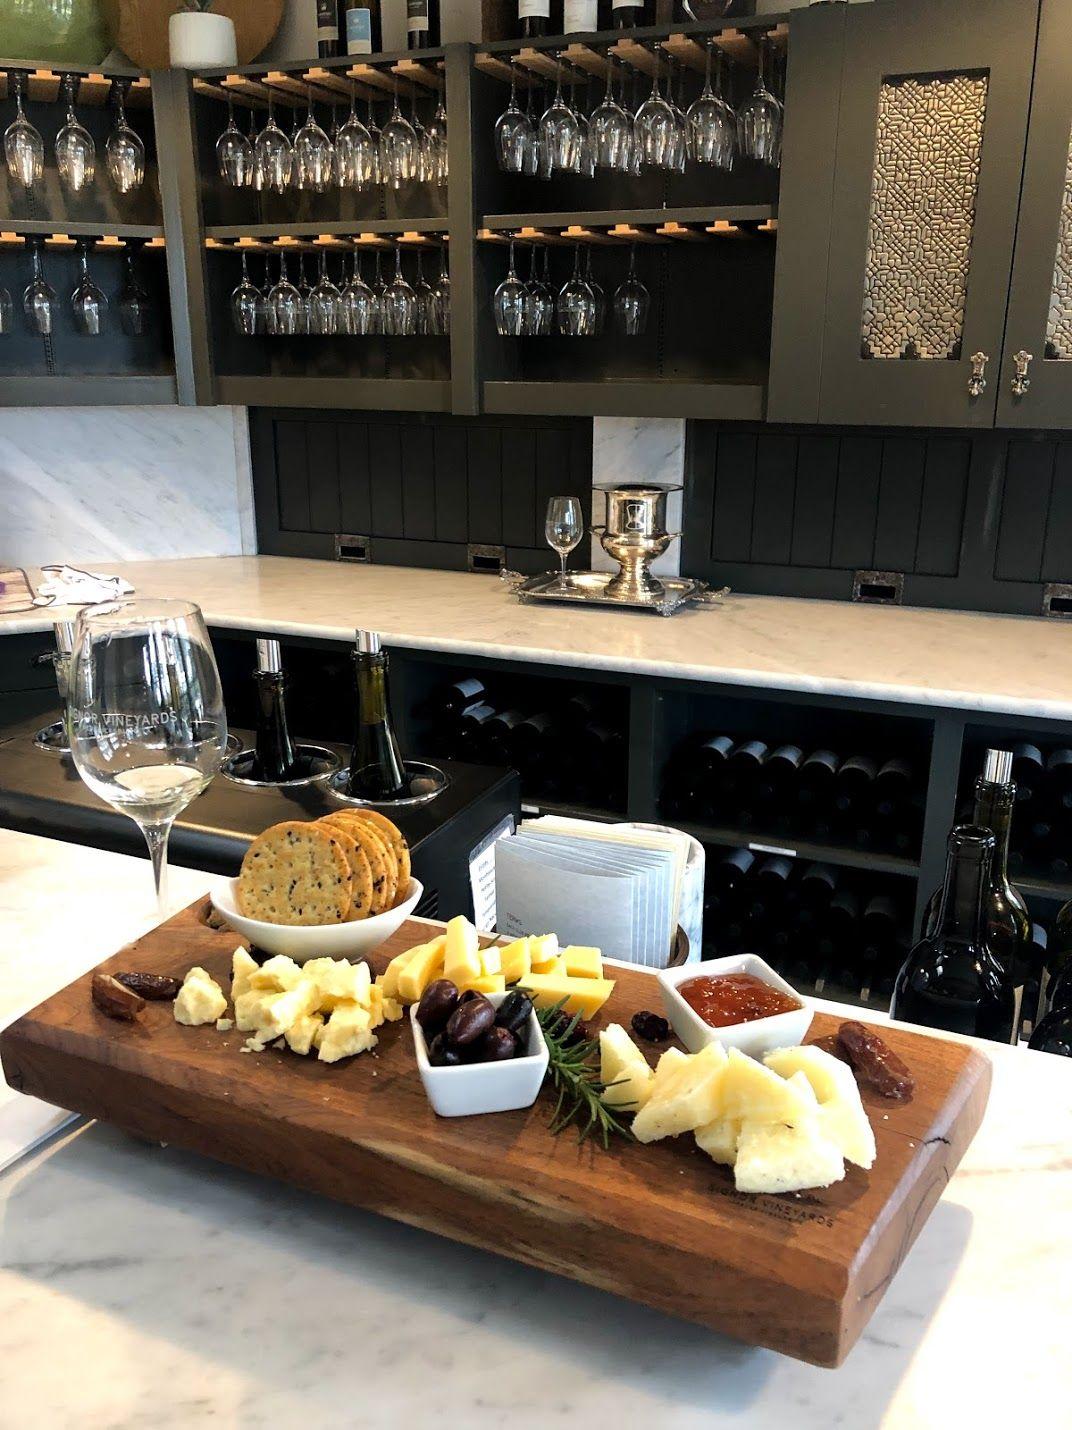 A cheese plate at the bar at Signor Vineyards. There are multiple cheeses, crackers, jam and berries.